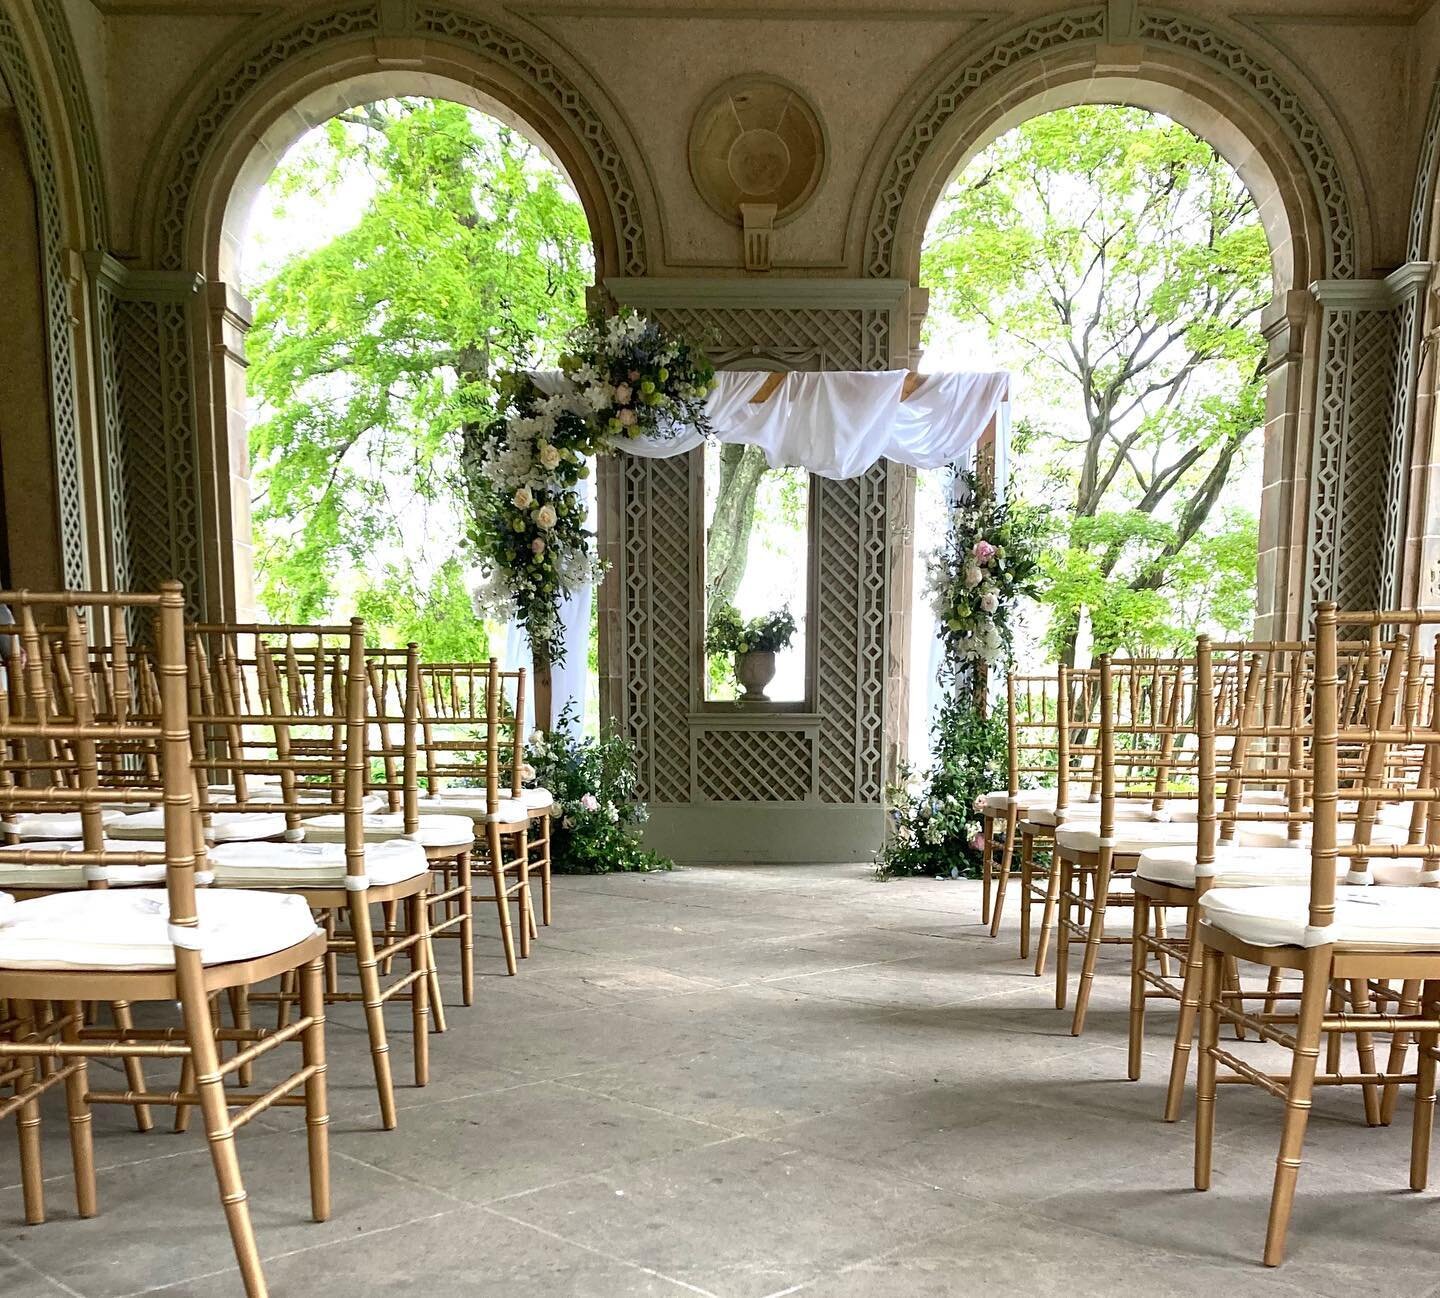 This @glenmanorhouse wedding was scheduled to take place outside in the garden, but similar to today, mother nature had other plans and we were able to create a stunning rain option on the terrace. 

I hope all the rain tightened the knot for this am